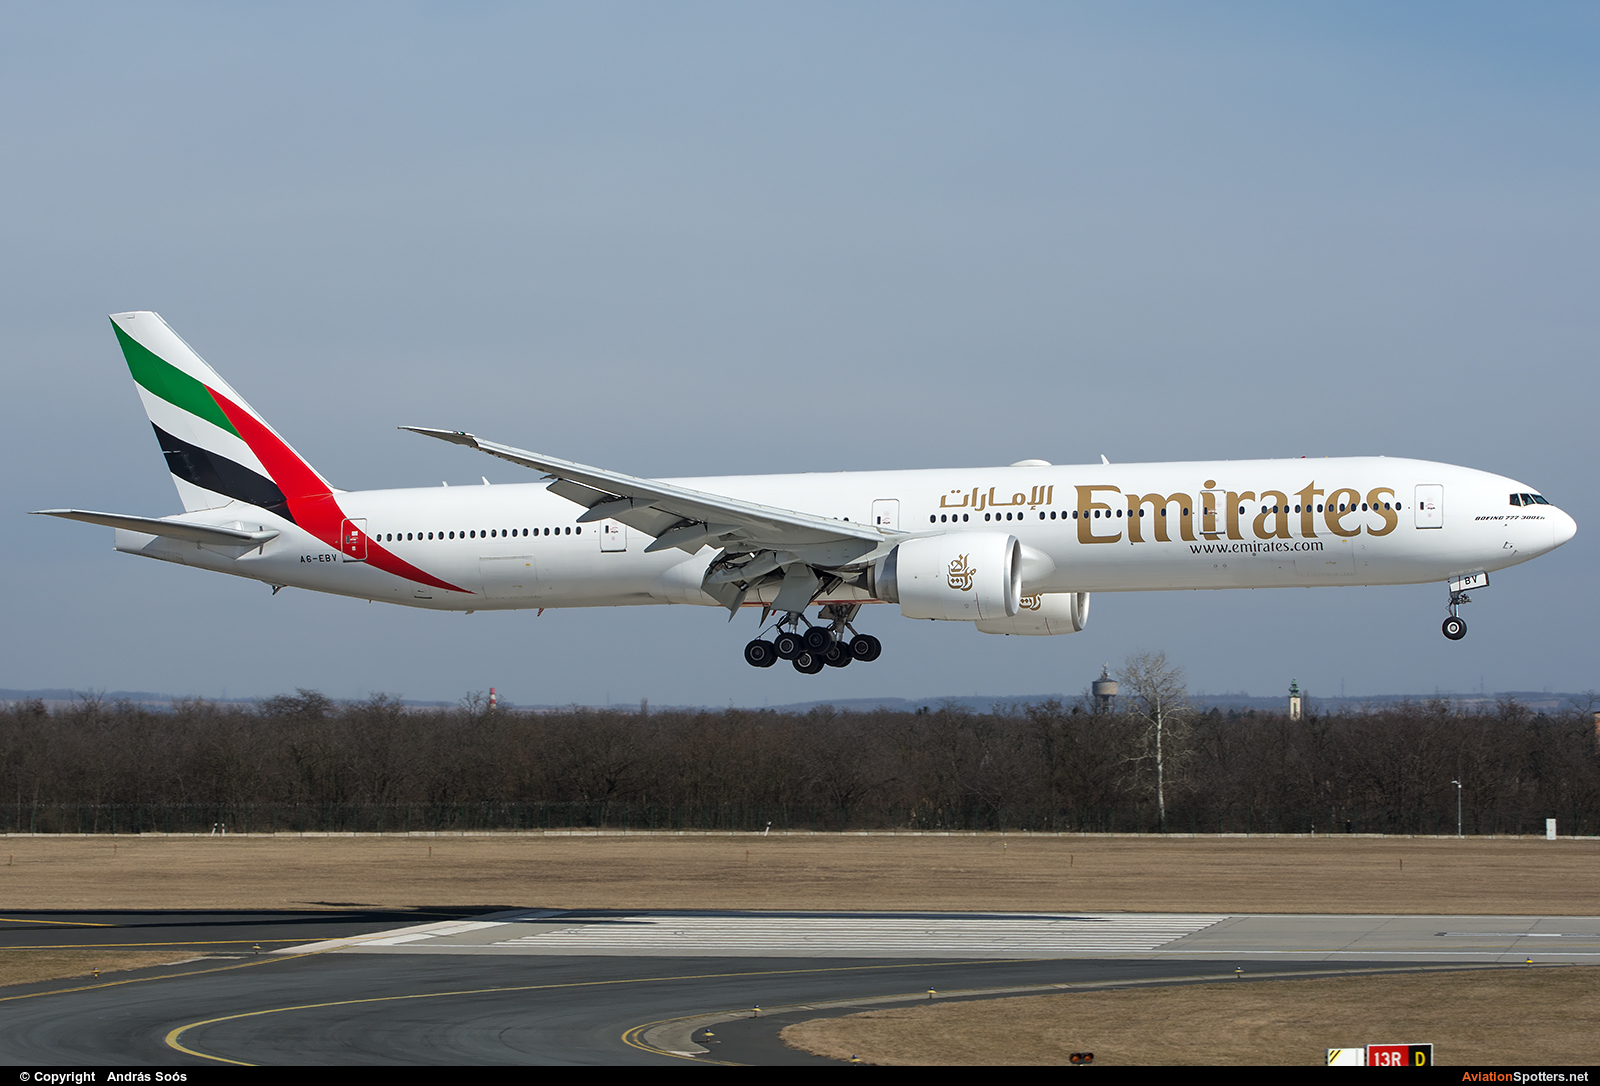 Emirates Airlines  -  777-300ER  (A6-EBV) By András Soós (sas1965)